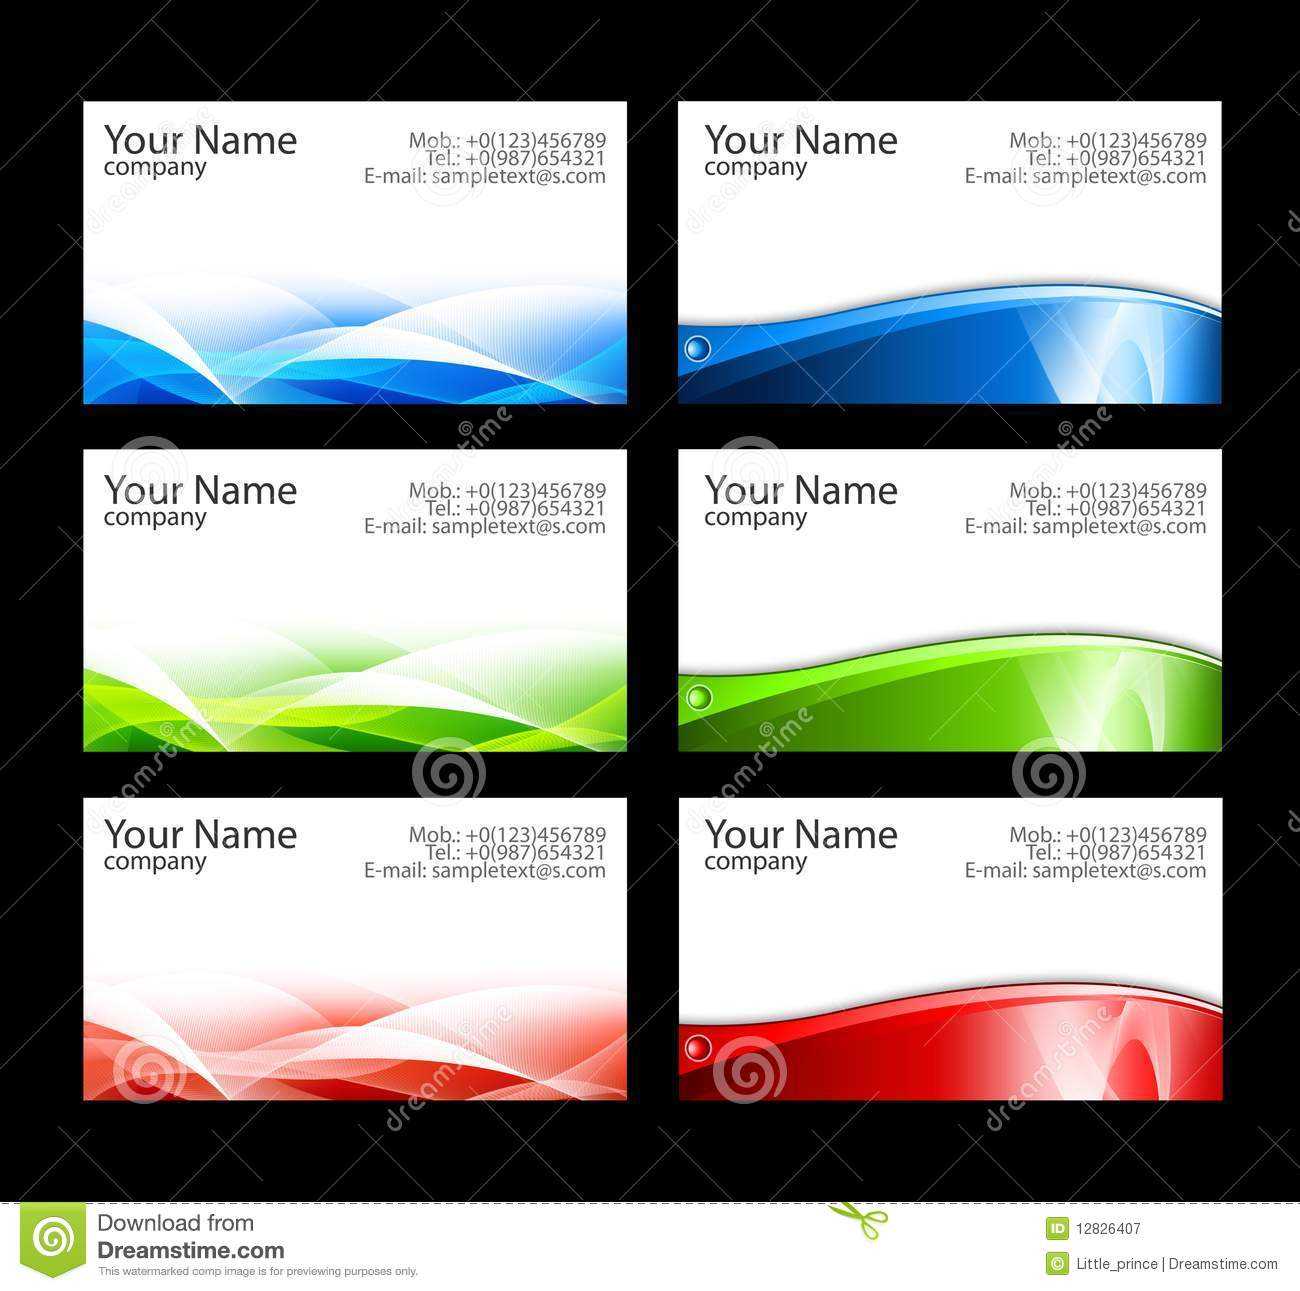 15 Free Avery Business Card Templates Images – Free Business Regarding Free Business Cards Templates For Word